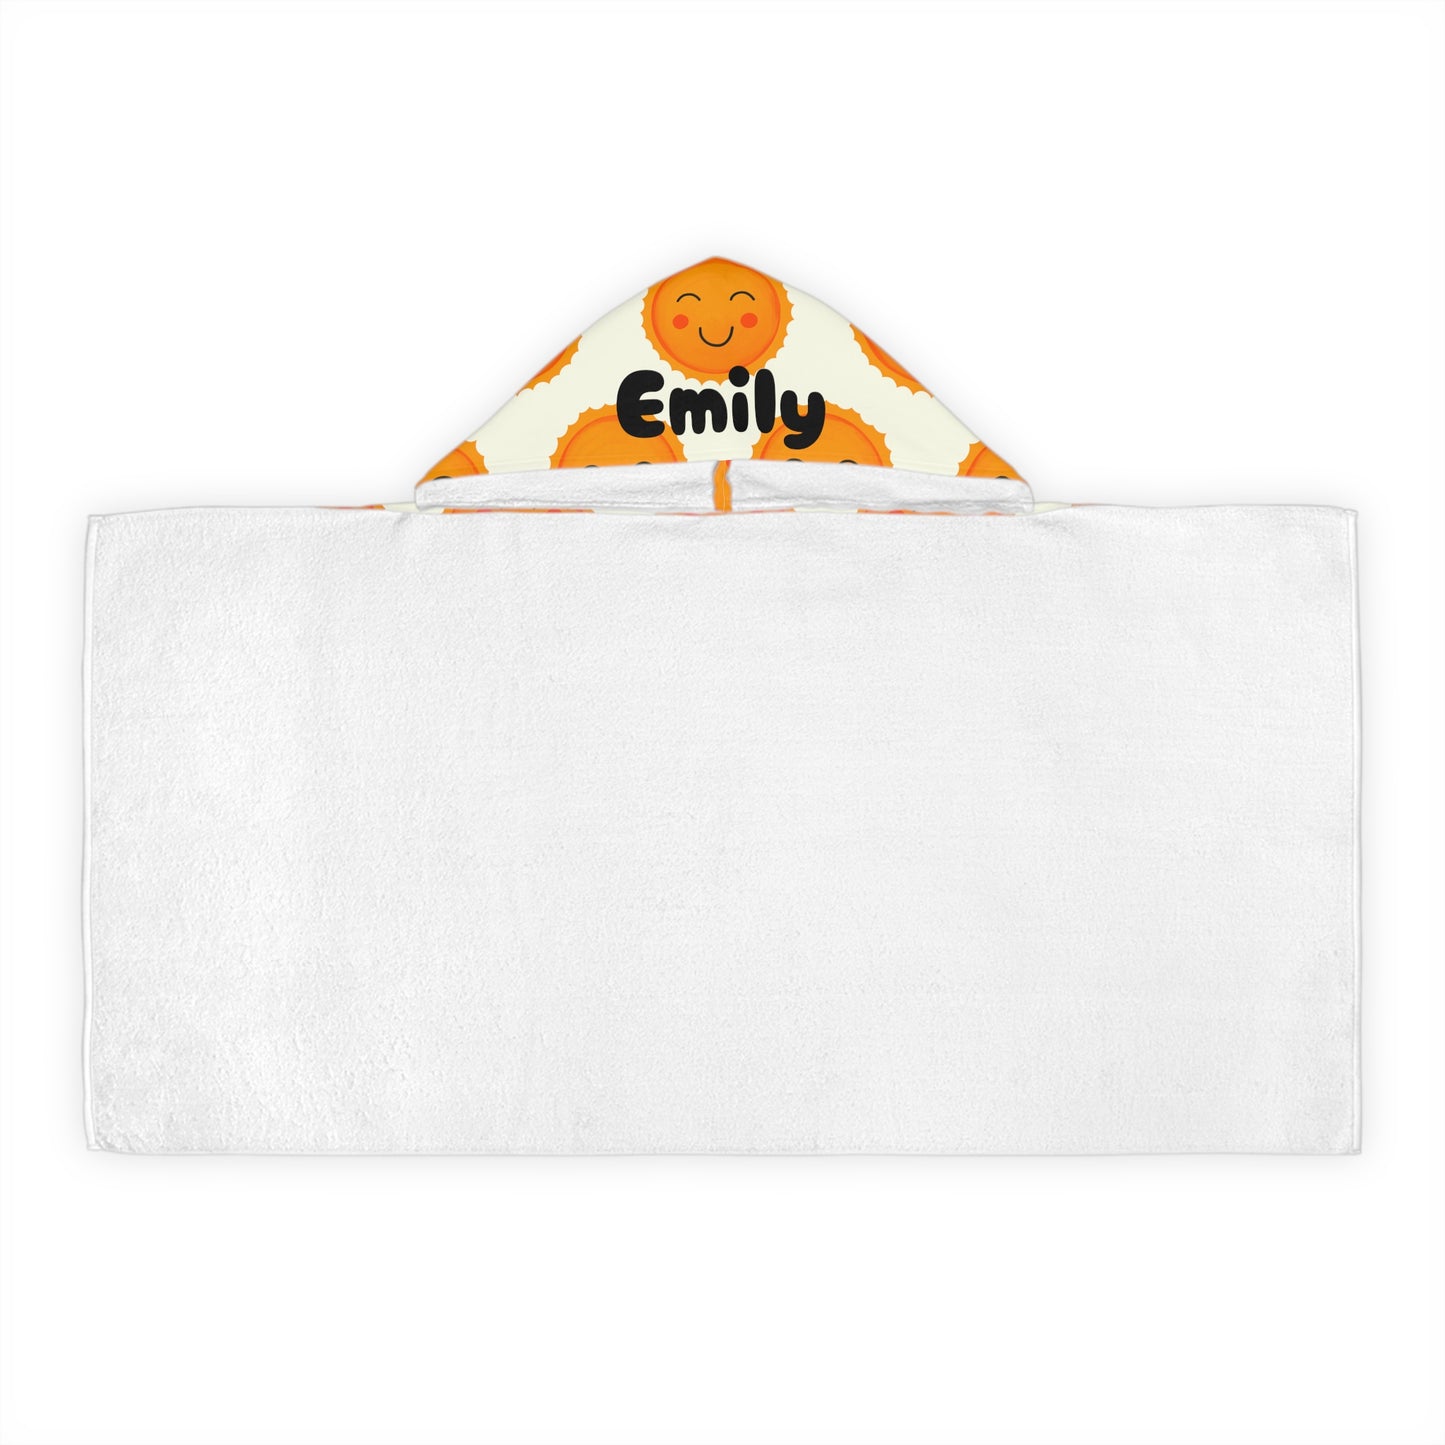 Smiling Sun Personalized Kids Hooded Towel, Youth Hooded Towel, Personalized Gift, Sunshine Beach Towel with Name, Hooded Name Towel